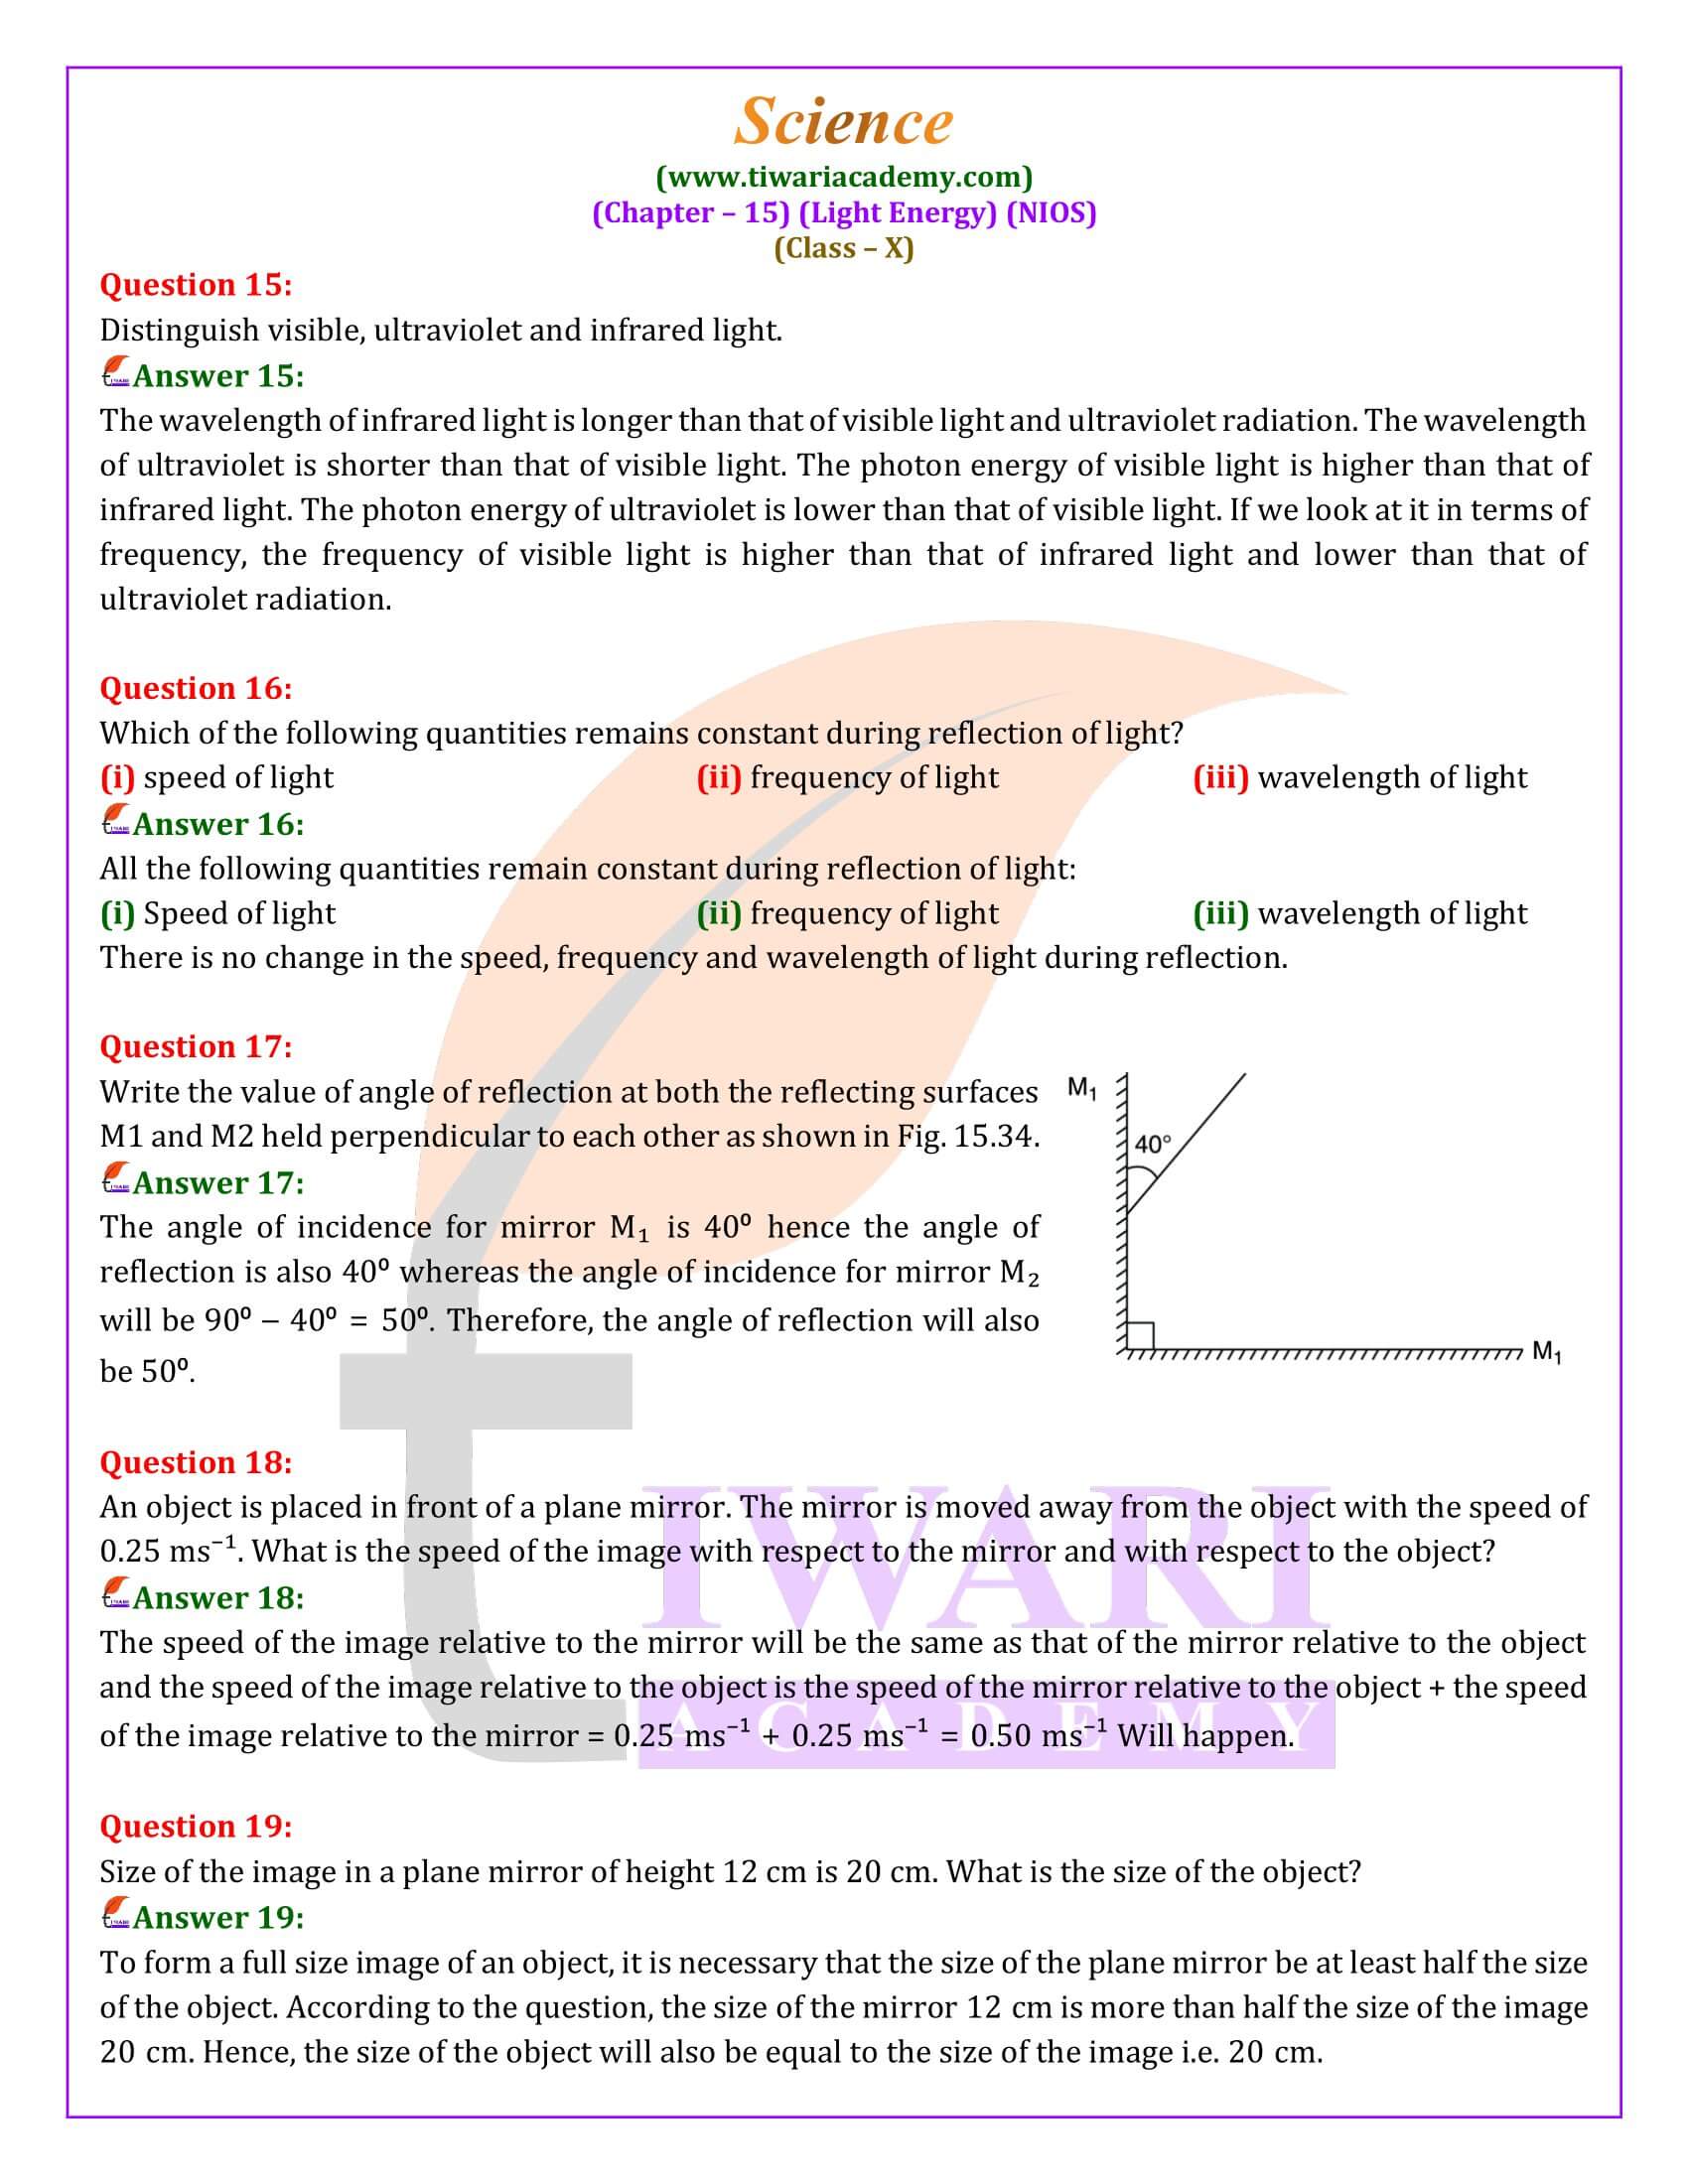 Class 10th Science Chapter 15 for NIOS students